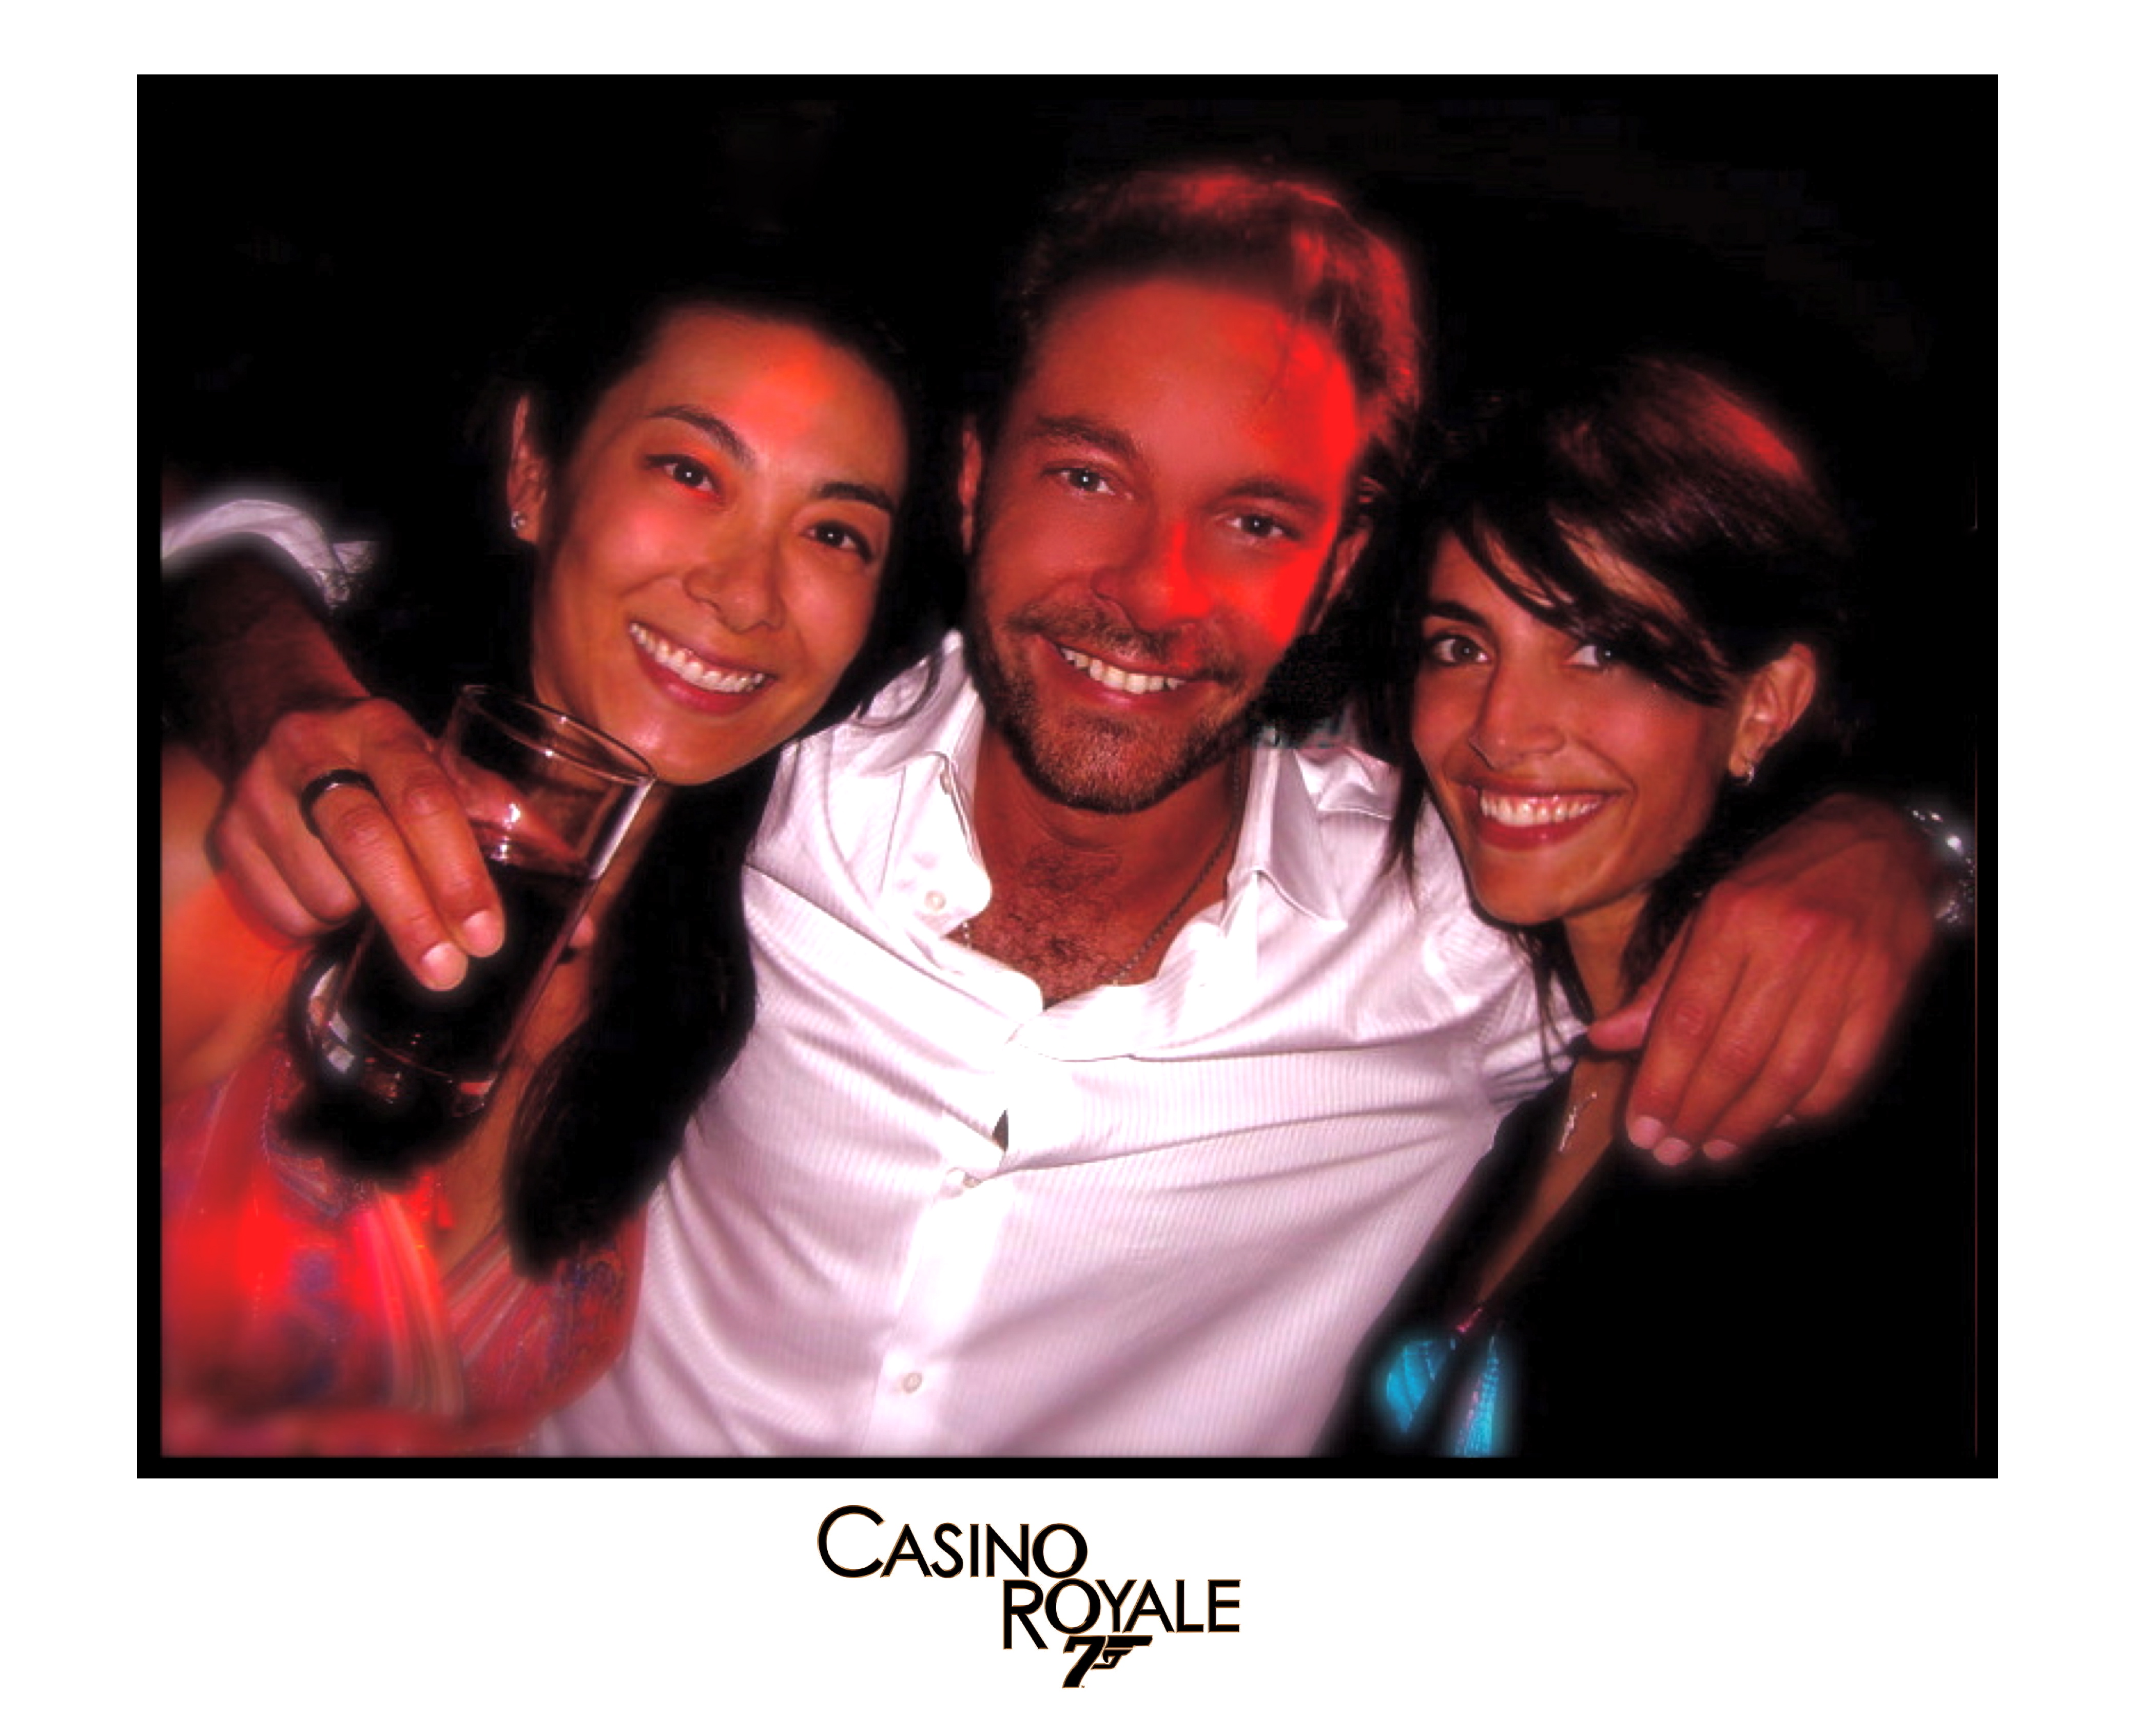 David Giammarco, Annabel Wilson (left), and Caterina Murino on break from filming 